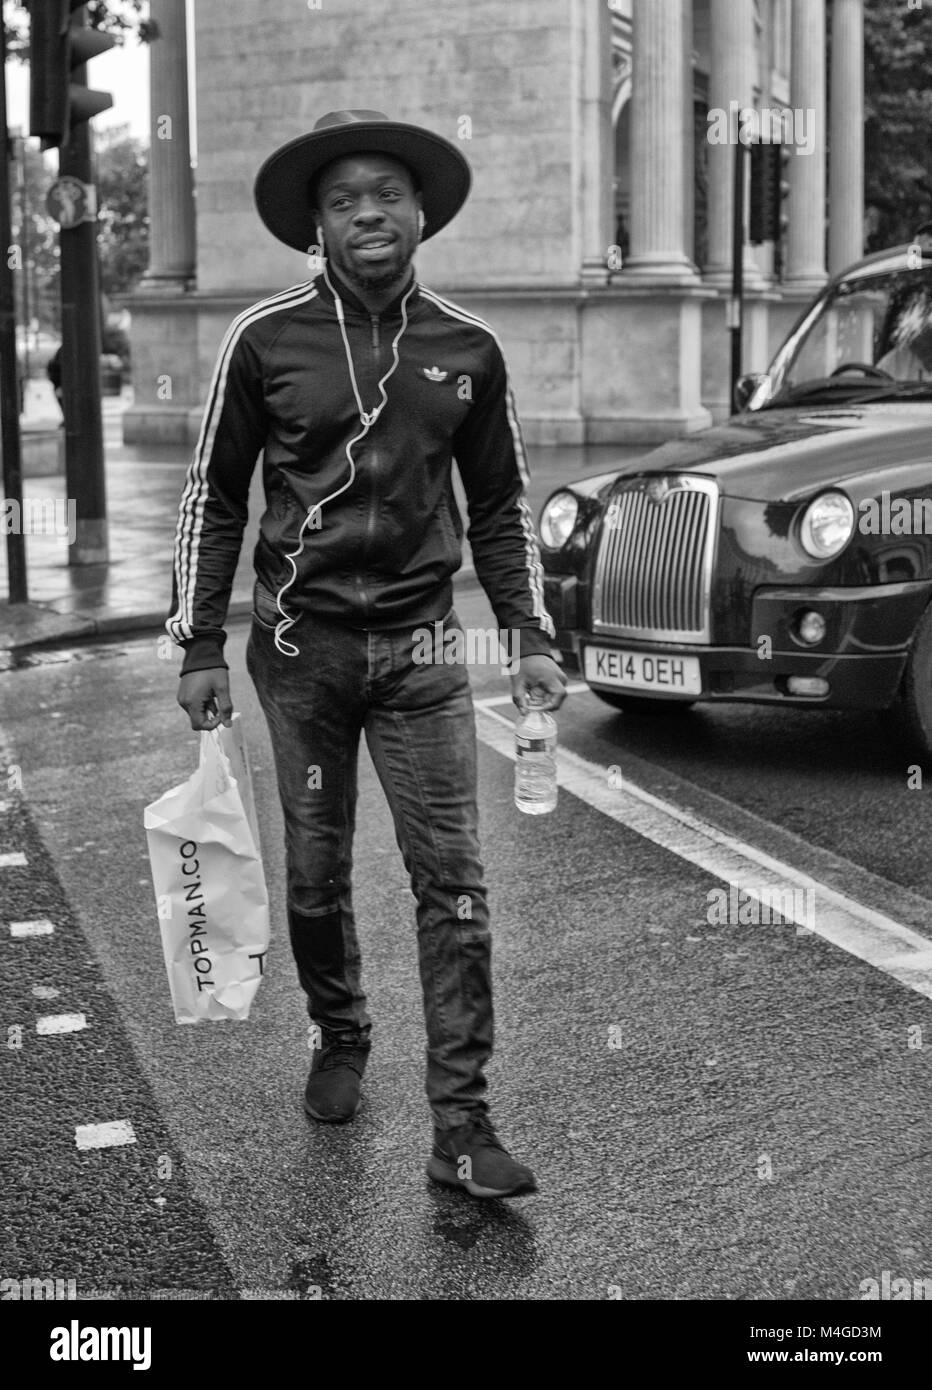 Black & White Photograph of a young man walking past Marble Arch, London, England, UK. Credit: London Snapper Stock Photo